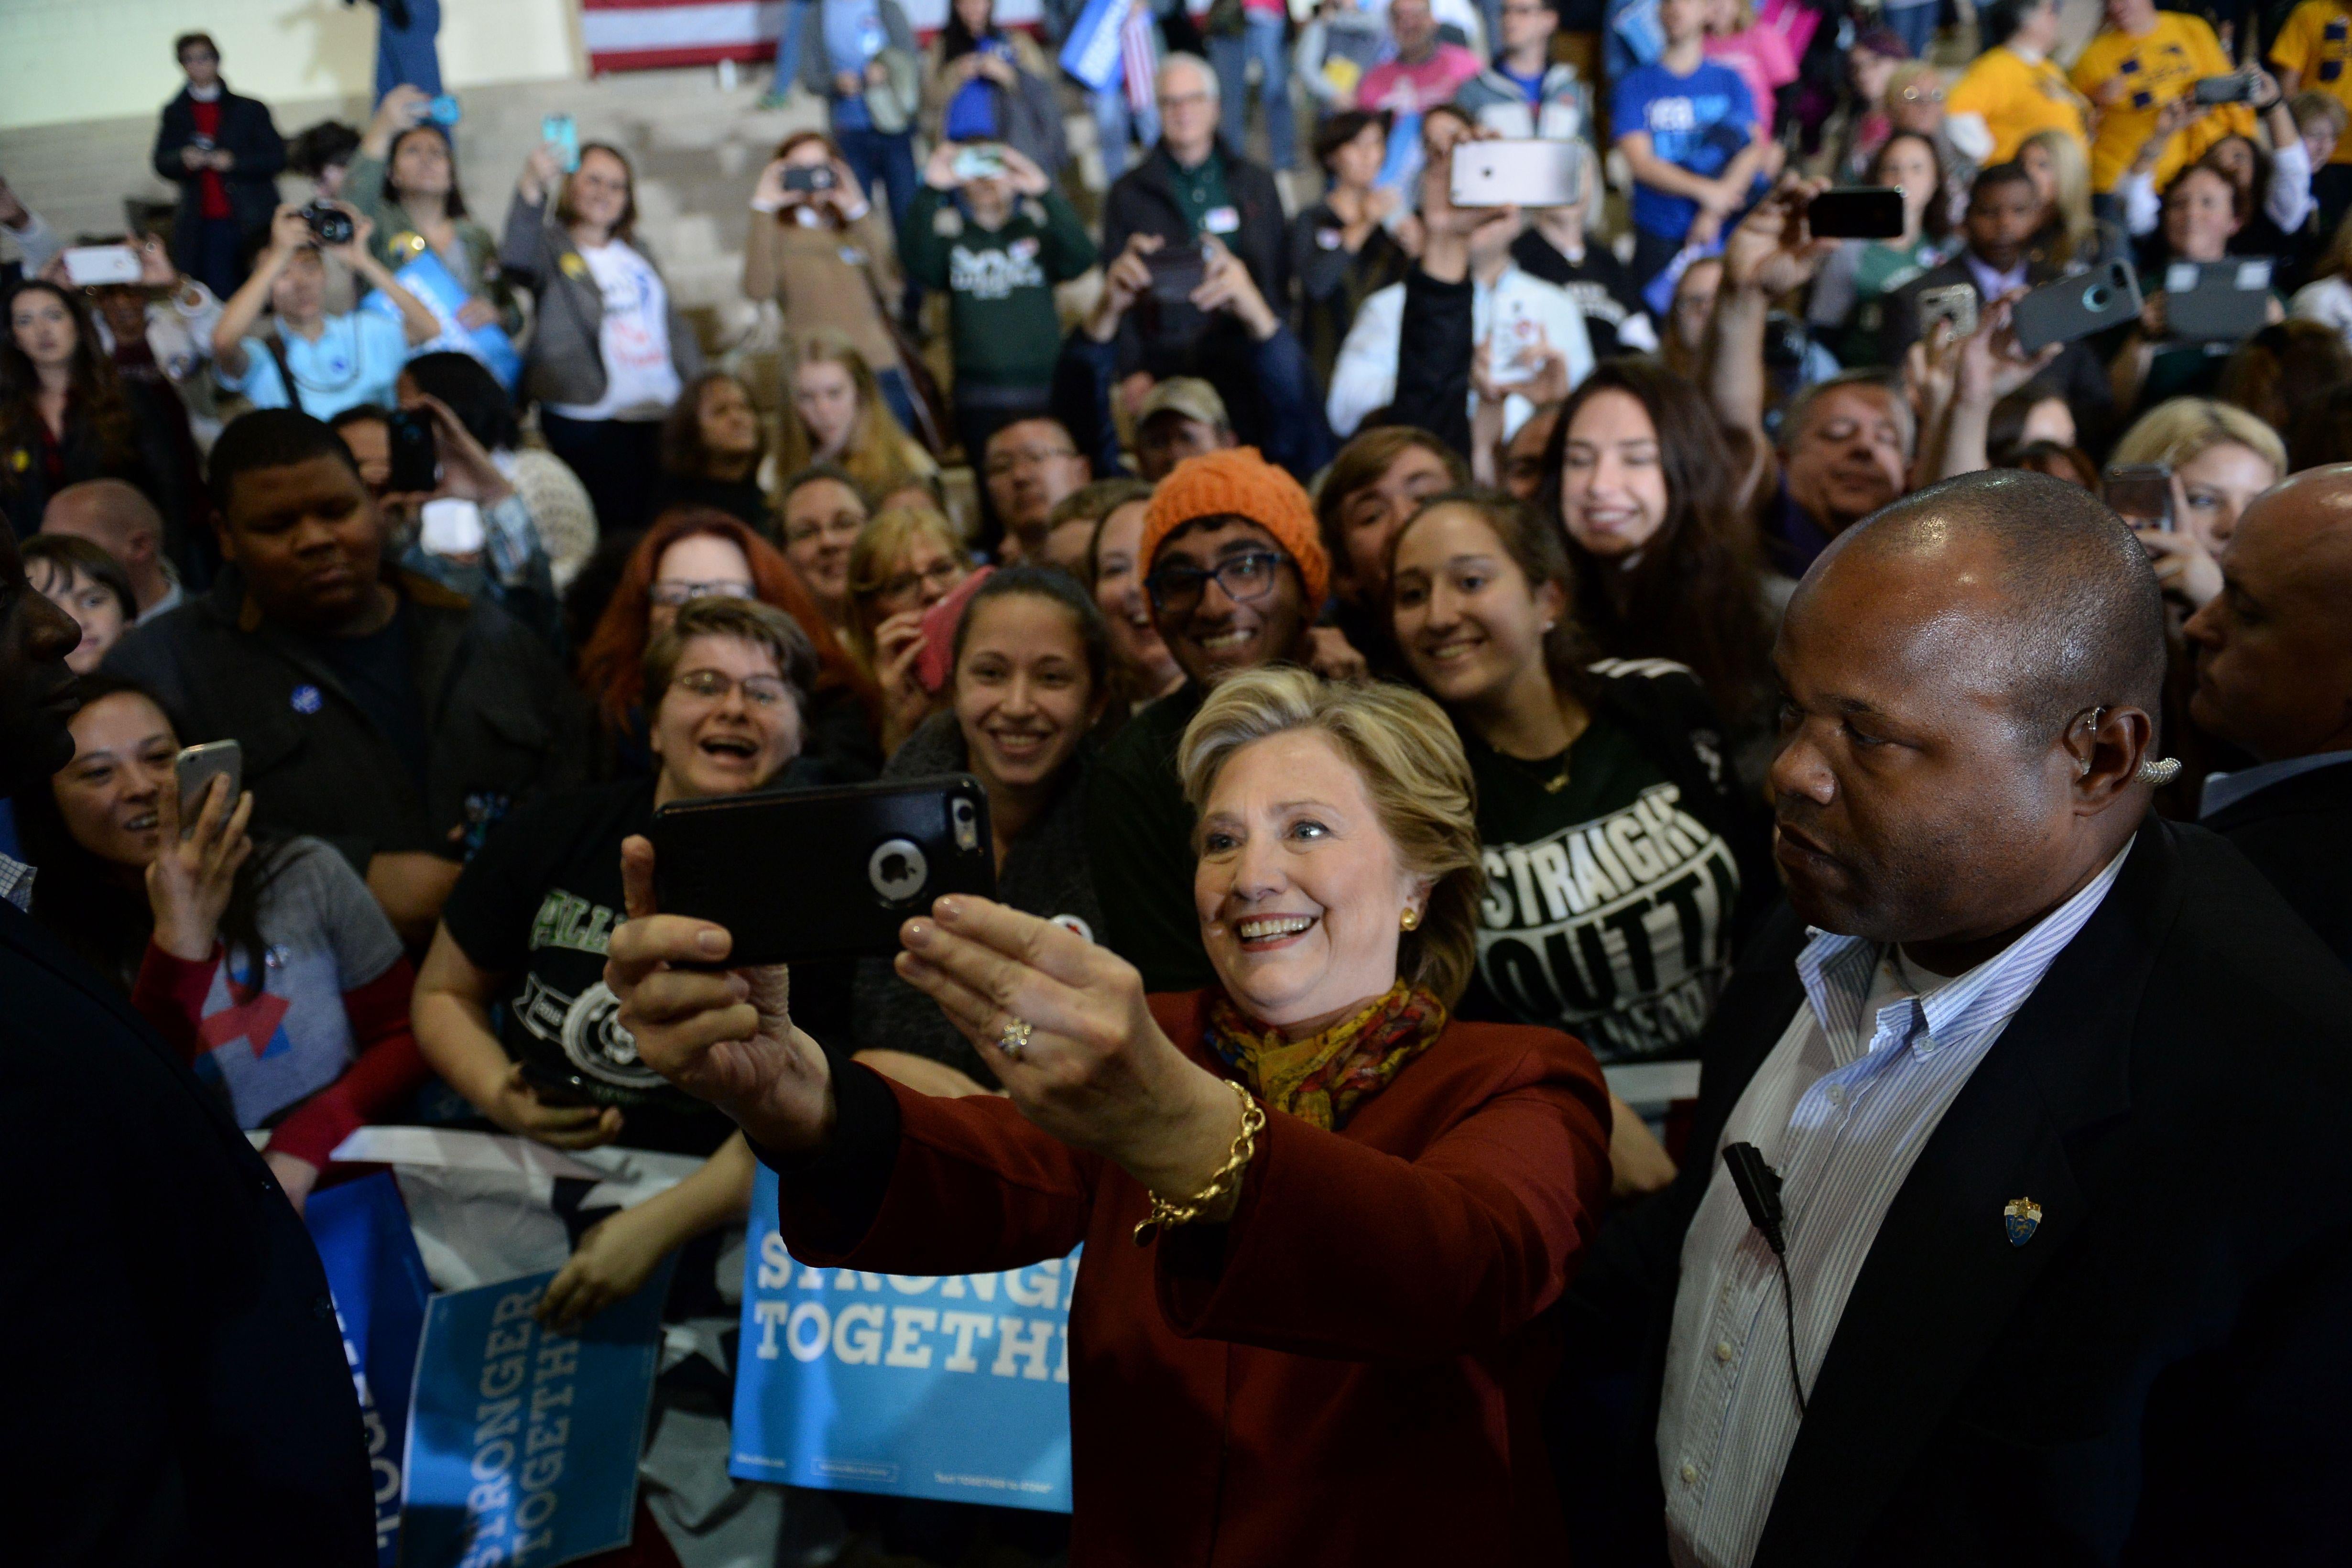 Democratic presidential nominee Hillary Clinton takes a selfie with supporters during a campaign event with her running mate Tim Kaine, October 22, 2016 at Taylor Allderdice High School in Pittsburgh, Pennsylvania. / AFP / Robyn BECK        (Photo credit should read ROBYN BECK/AFP/Getty Images)